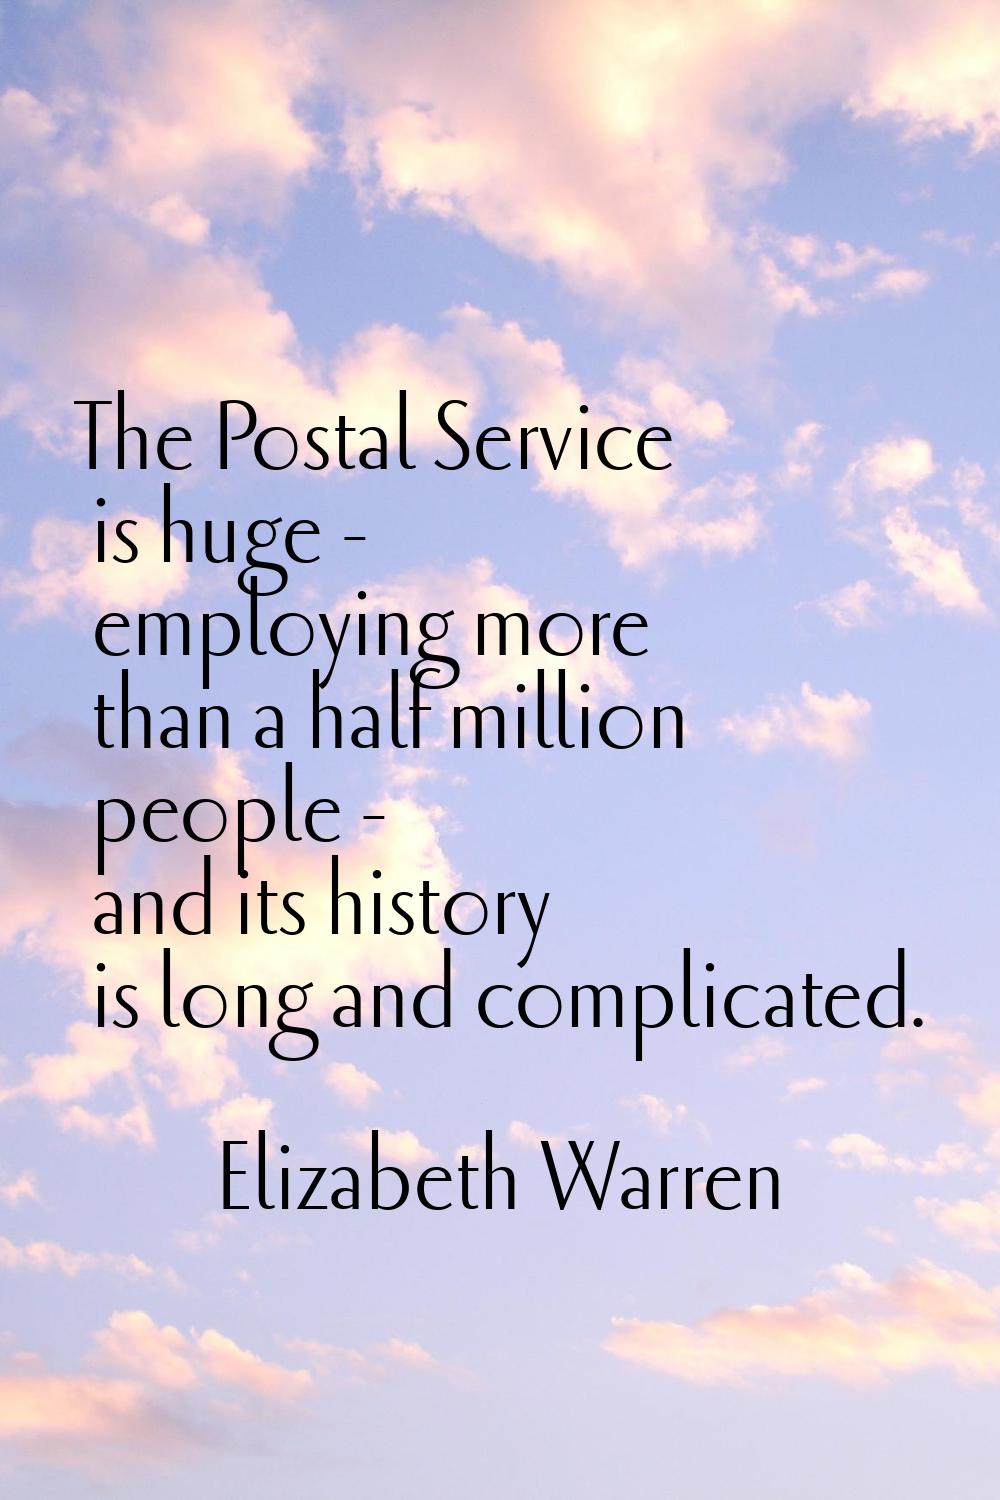 The Postal Service is huge - employing more than a half million people - and its history is long an